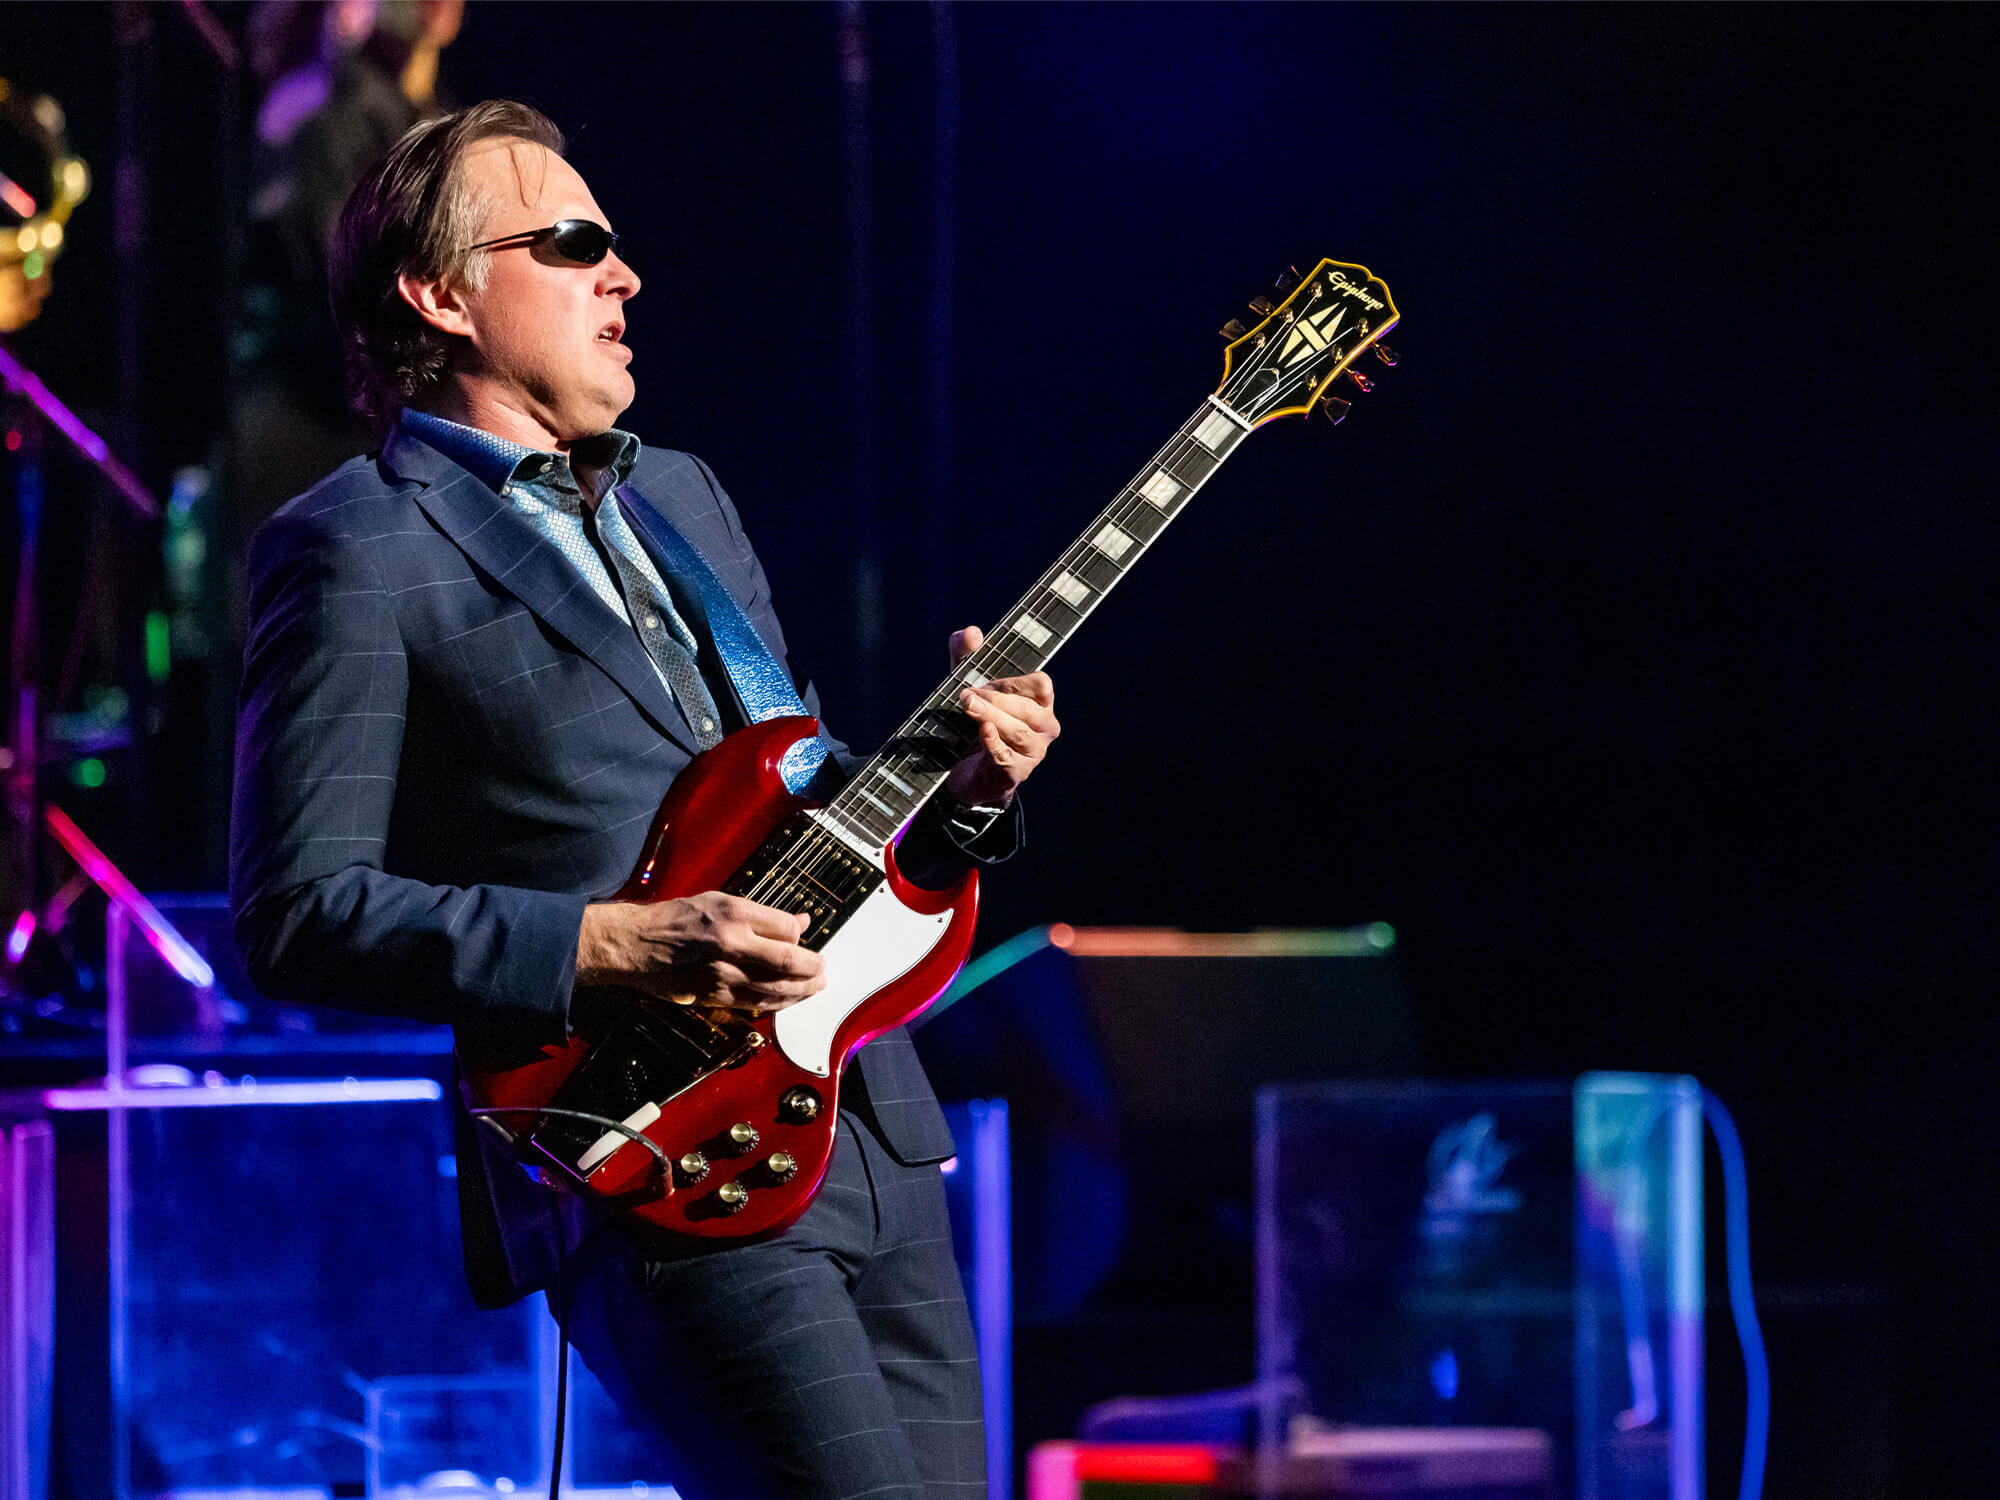 Joe Bonamassa playing guitar on stage. He is wearing a suit and sunglasses and is leaning back as he plays with expression.